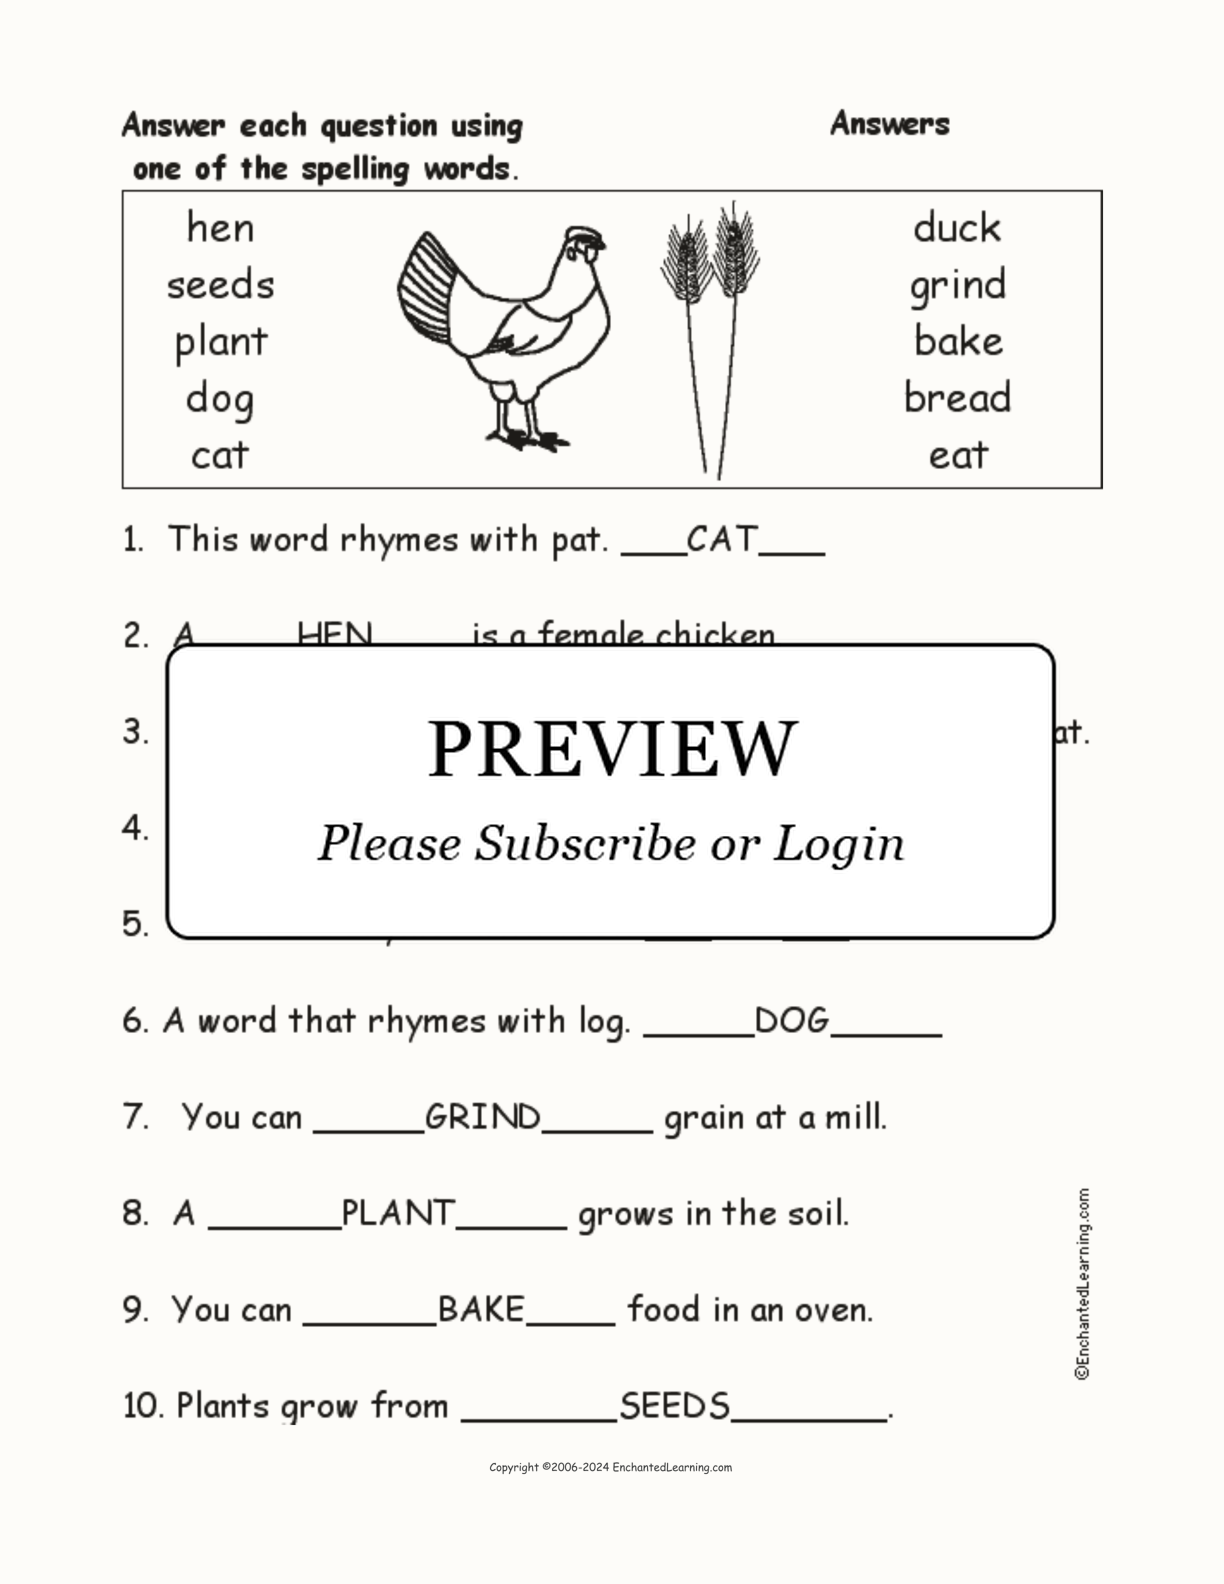 The Little Red Hen: Spelling Word Questions interactive worksheet page 2